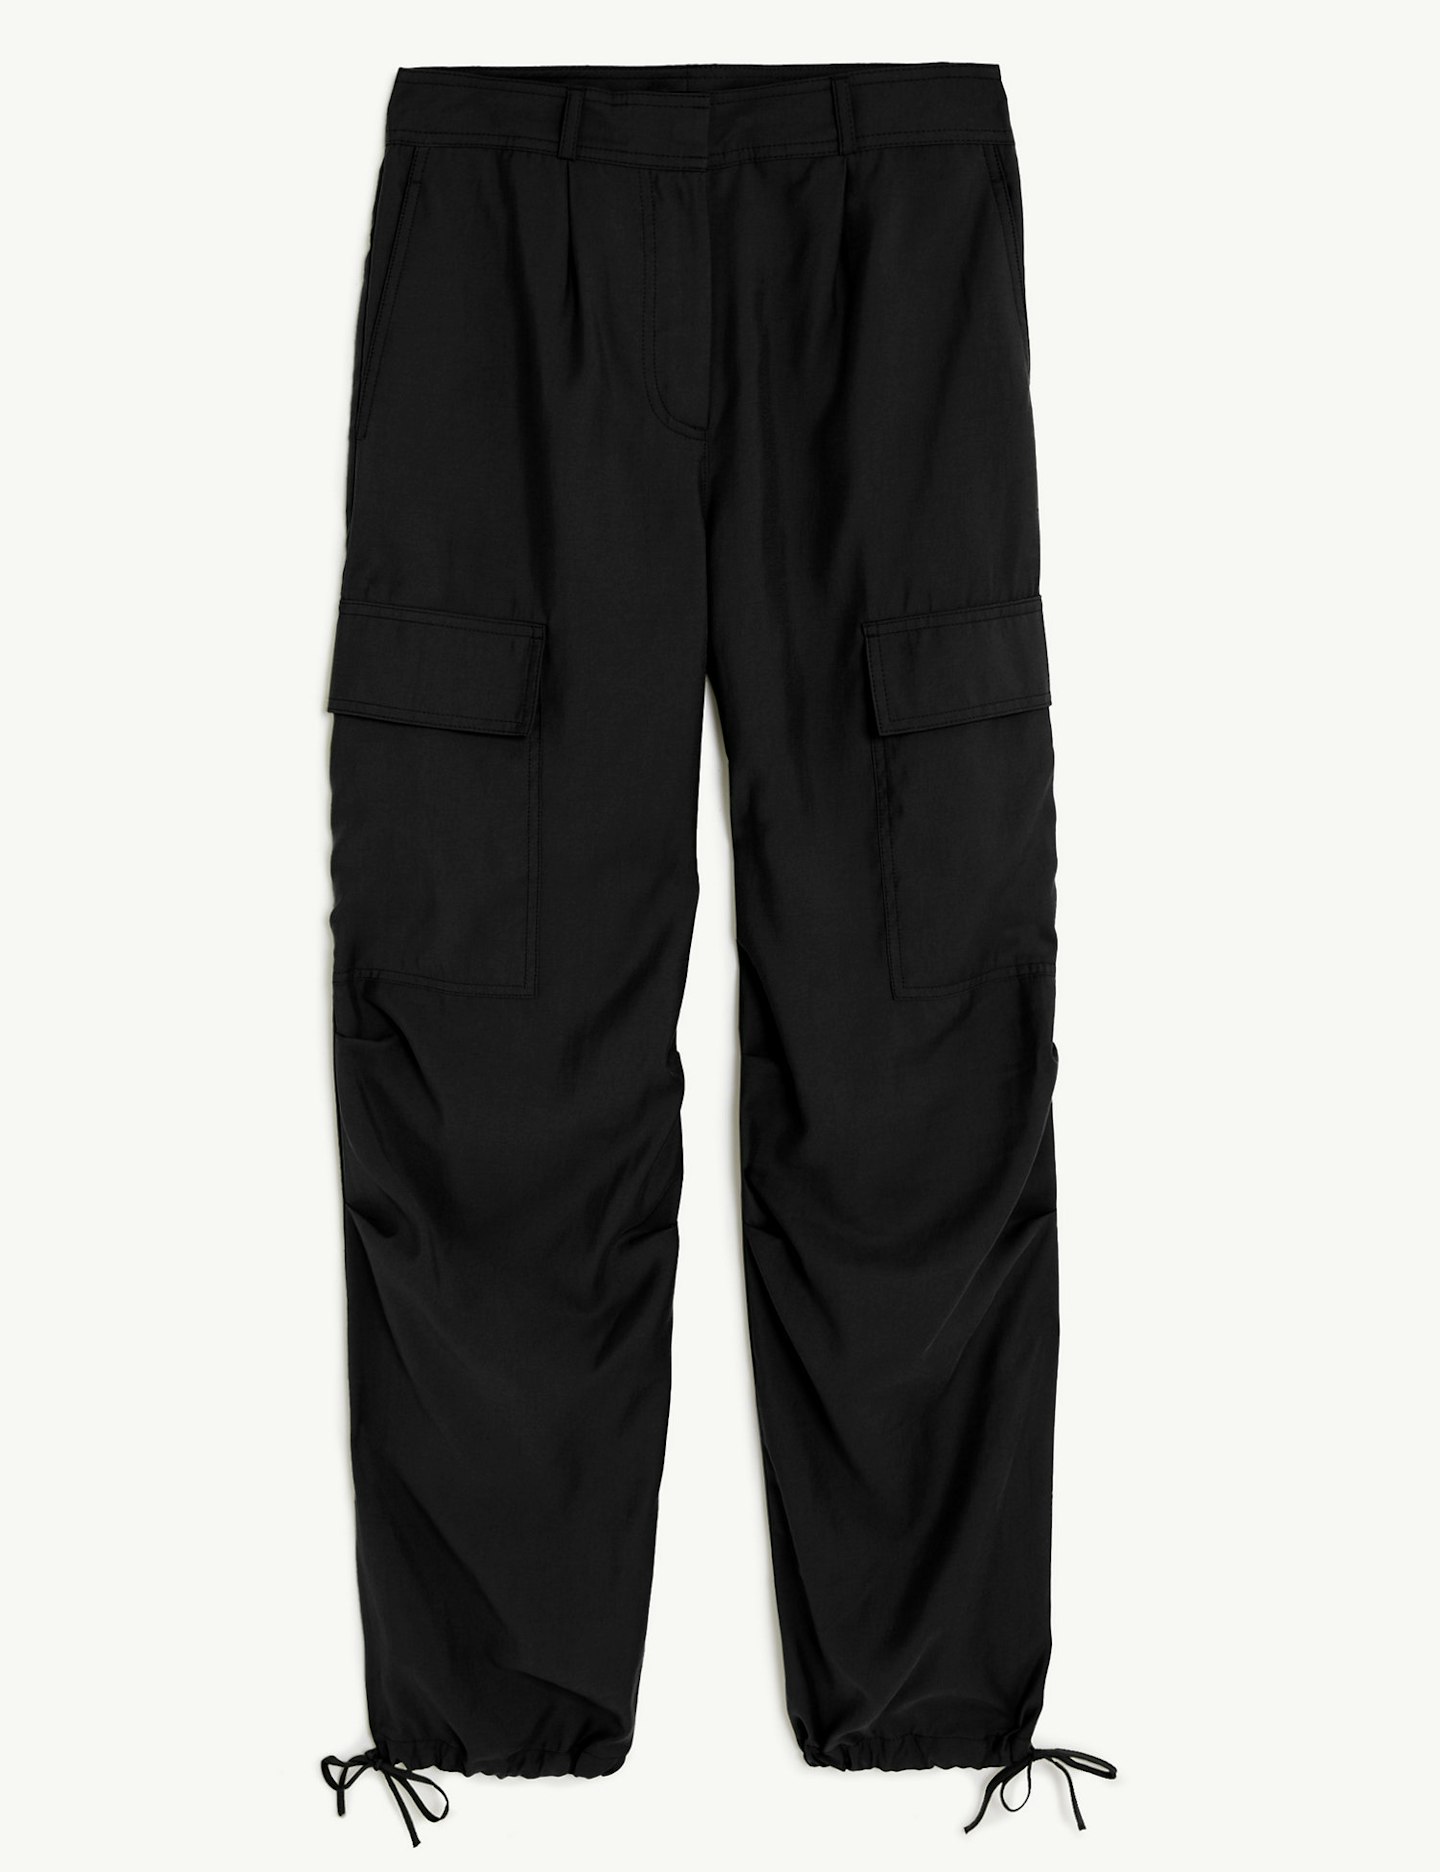 Here's Why We Love These Marks & Spencer Cargo Trousers